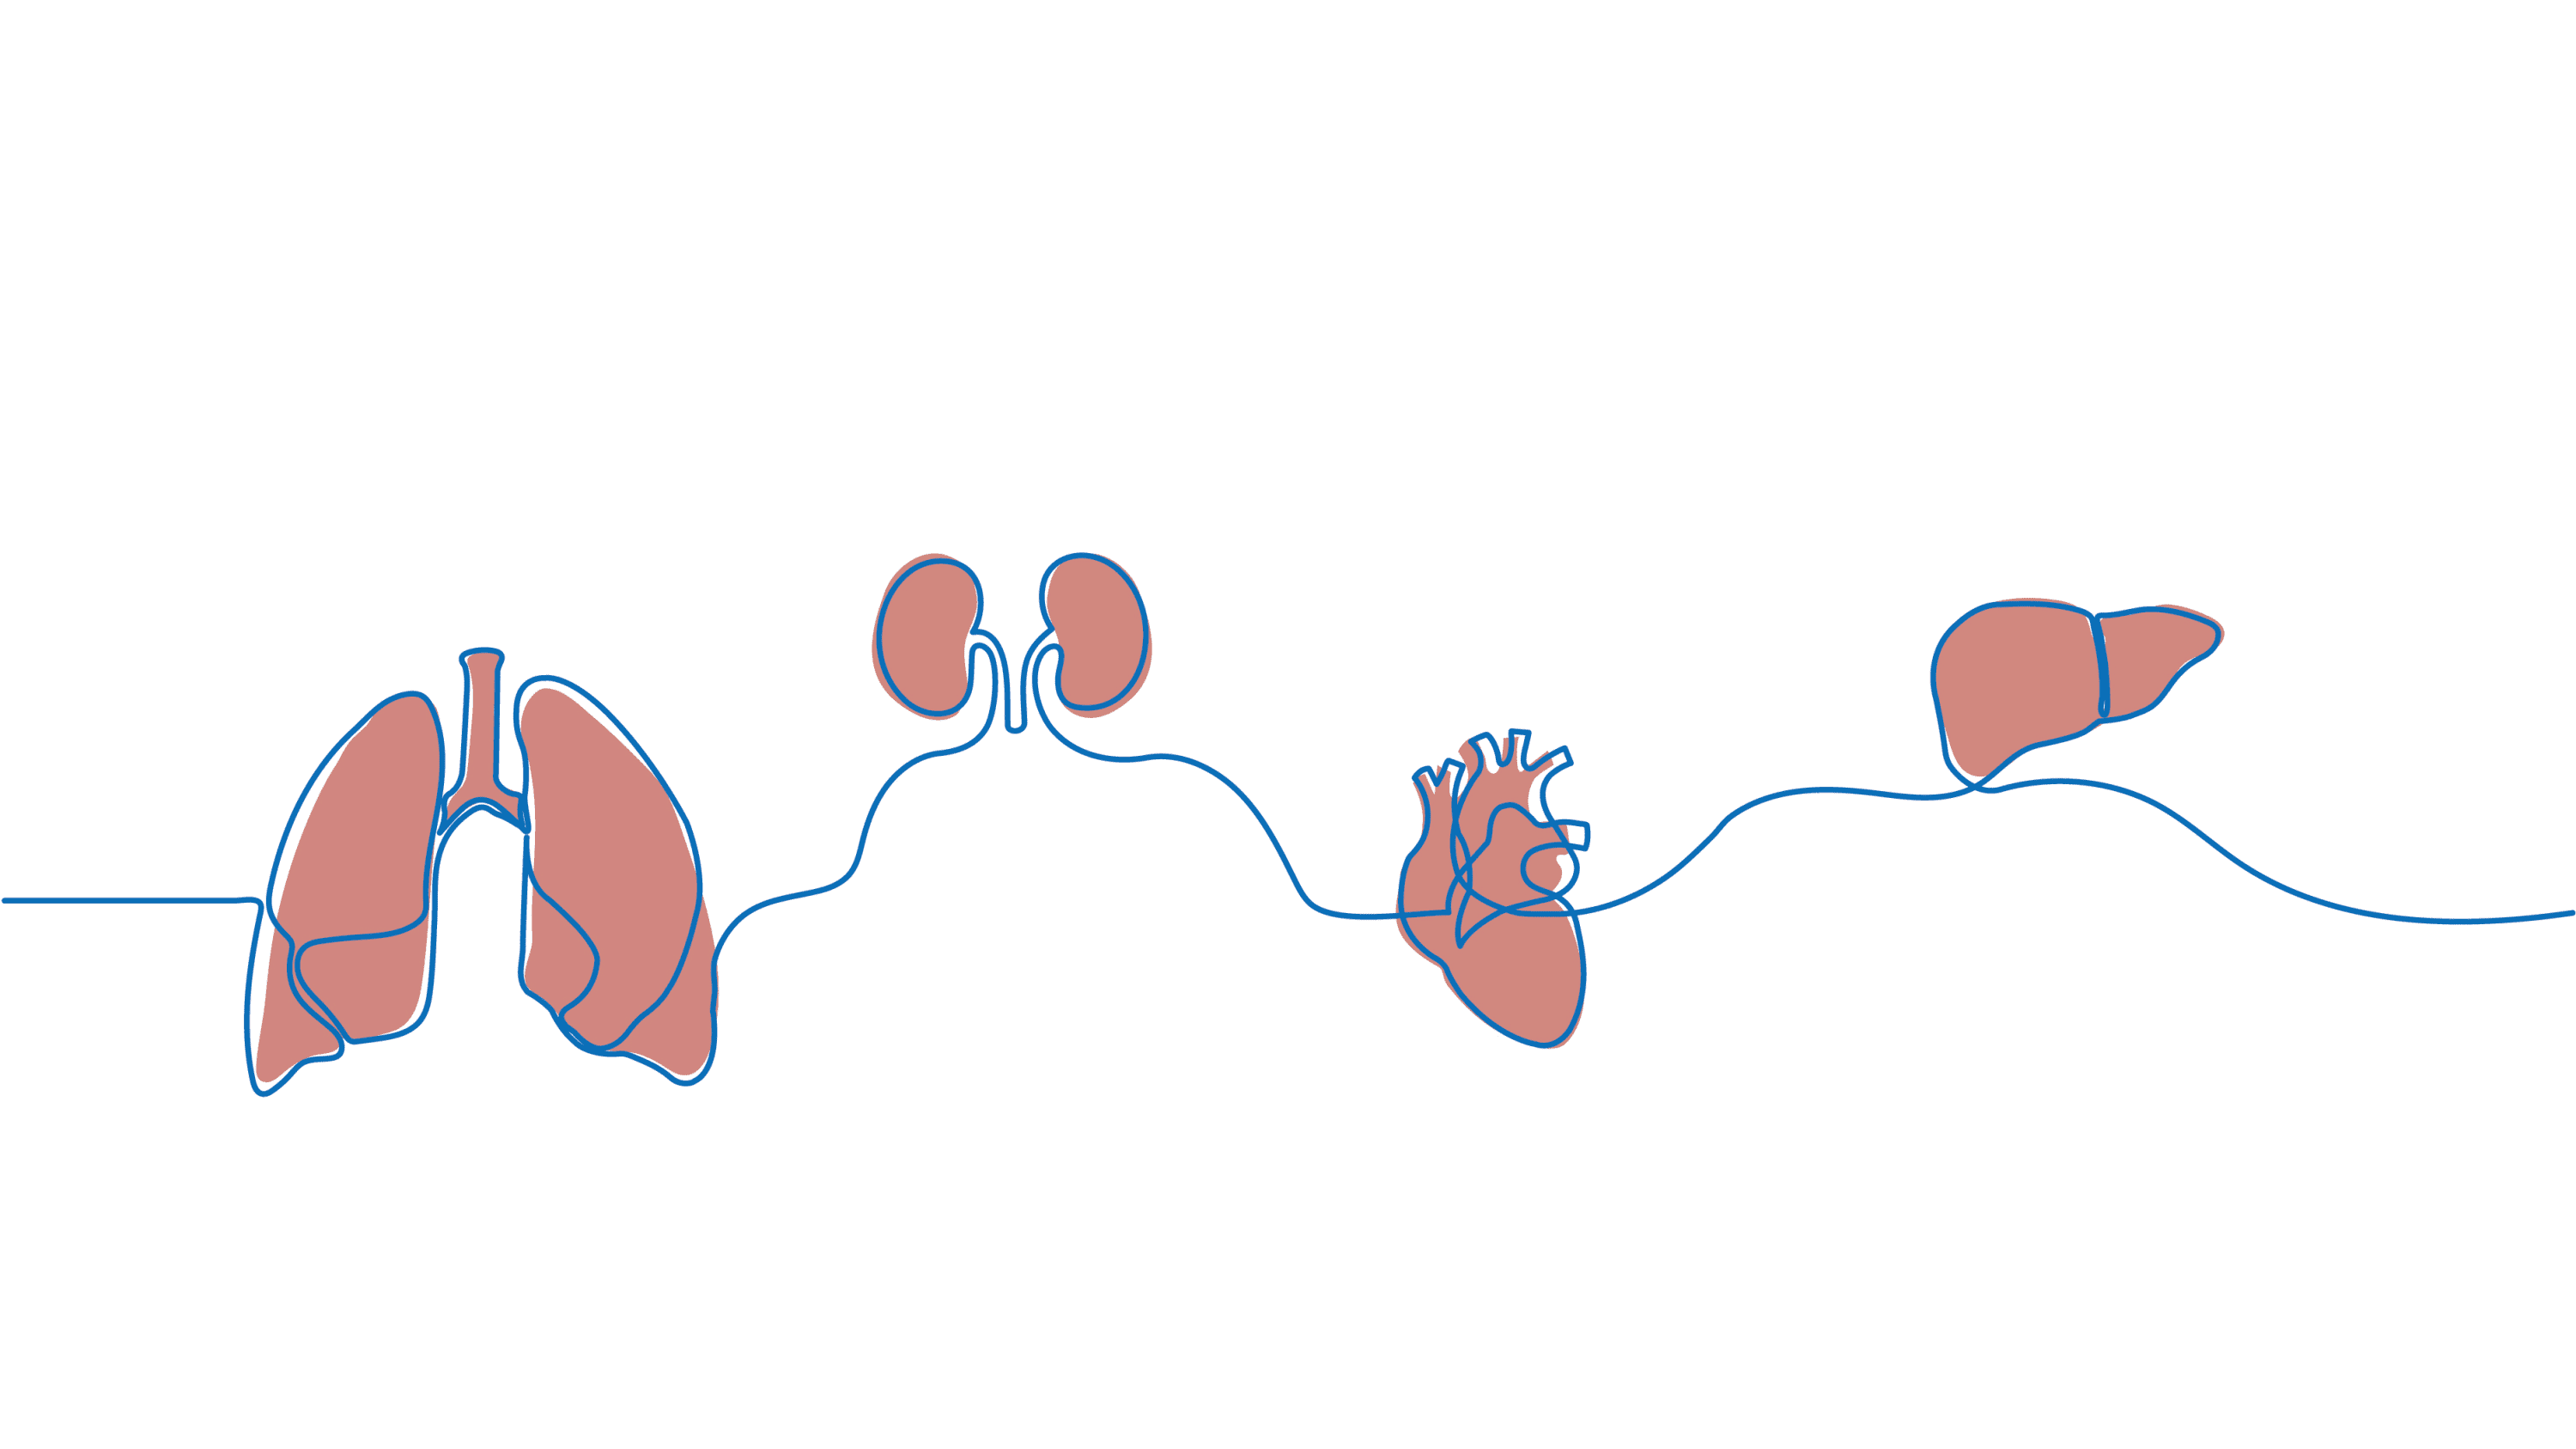 Line drawing of organs connected by one line